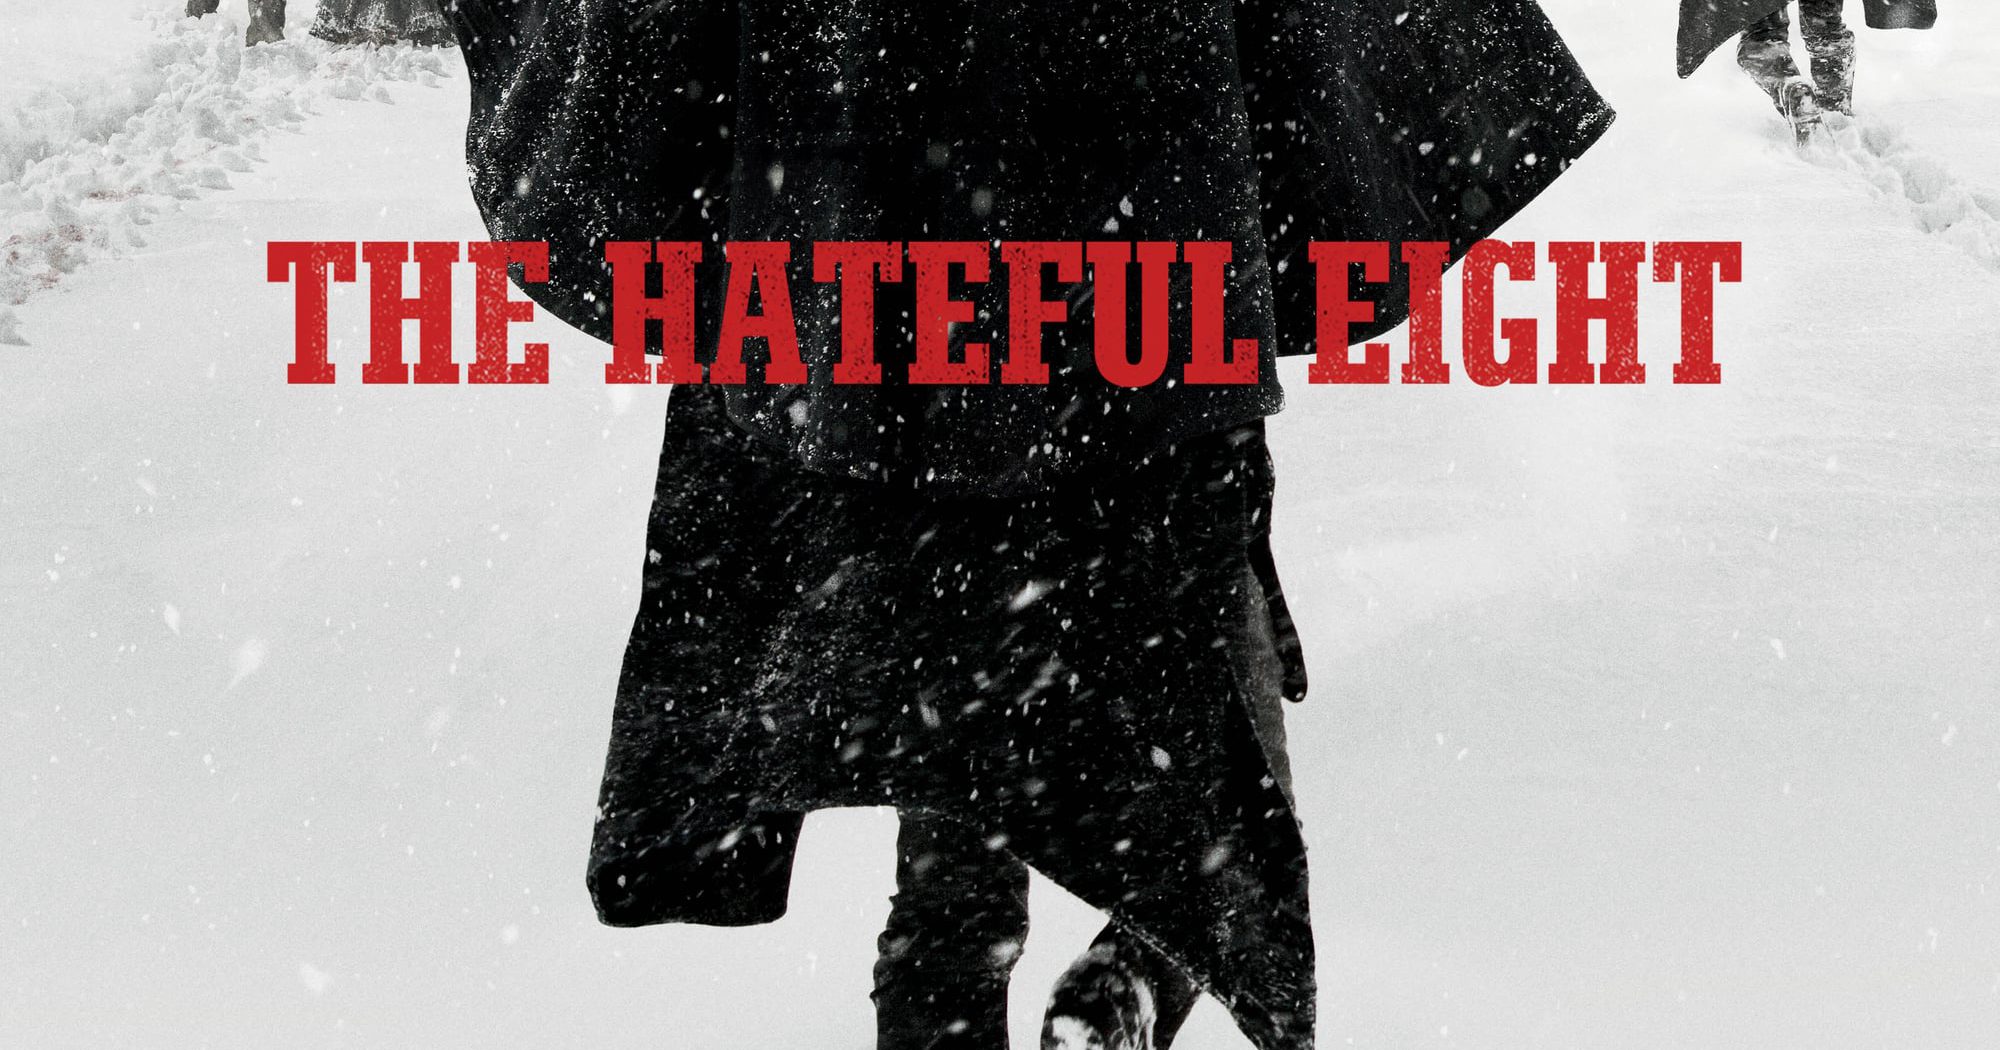 Poster for the movie "The Hateful Eight"